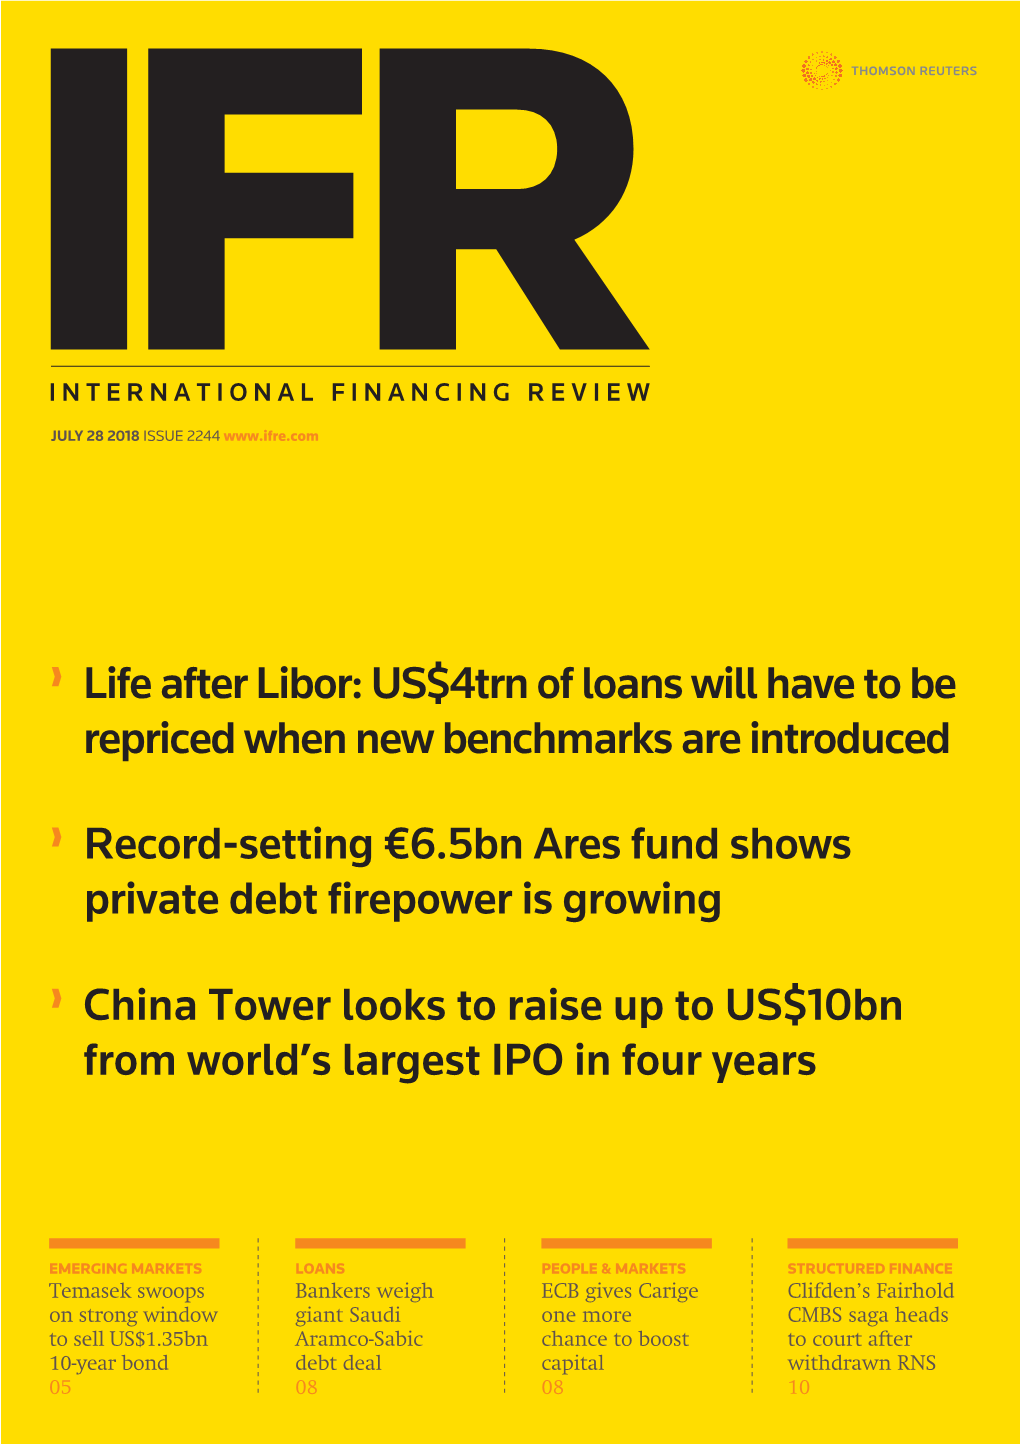 Life After Libor: US$4Trn of Loans Will Have to Be Repriced When New Benchmarks Are Introduced